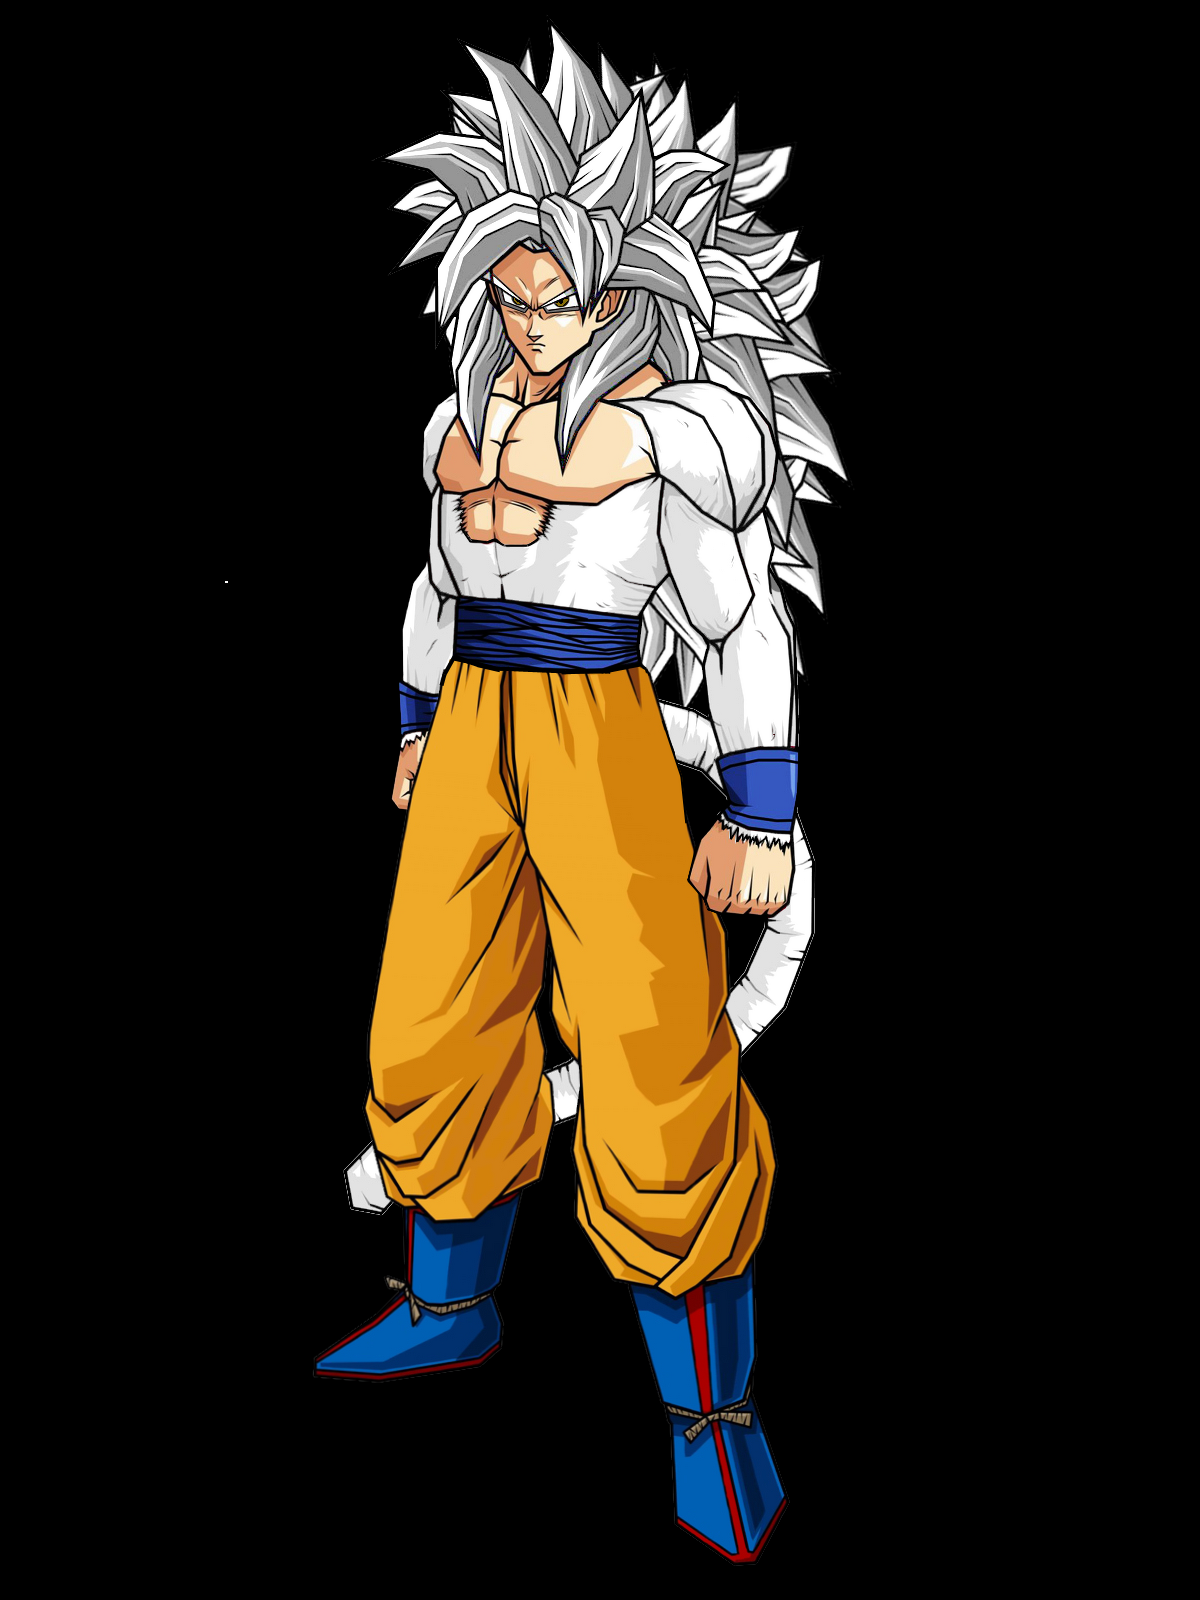 If SSJ5 was Canon, is SSJ 5 Goku equal to or stronger than SSB